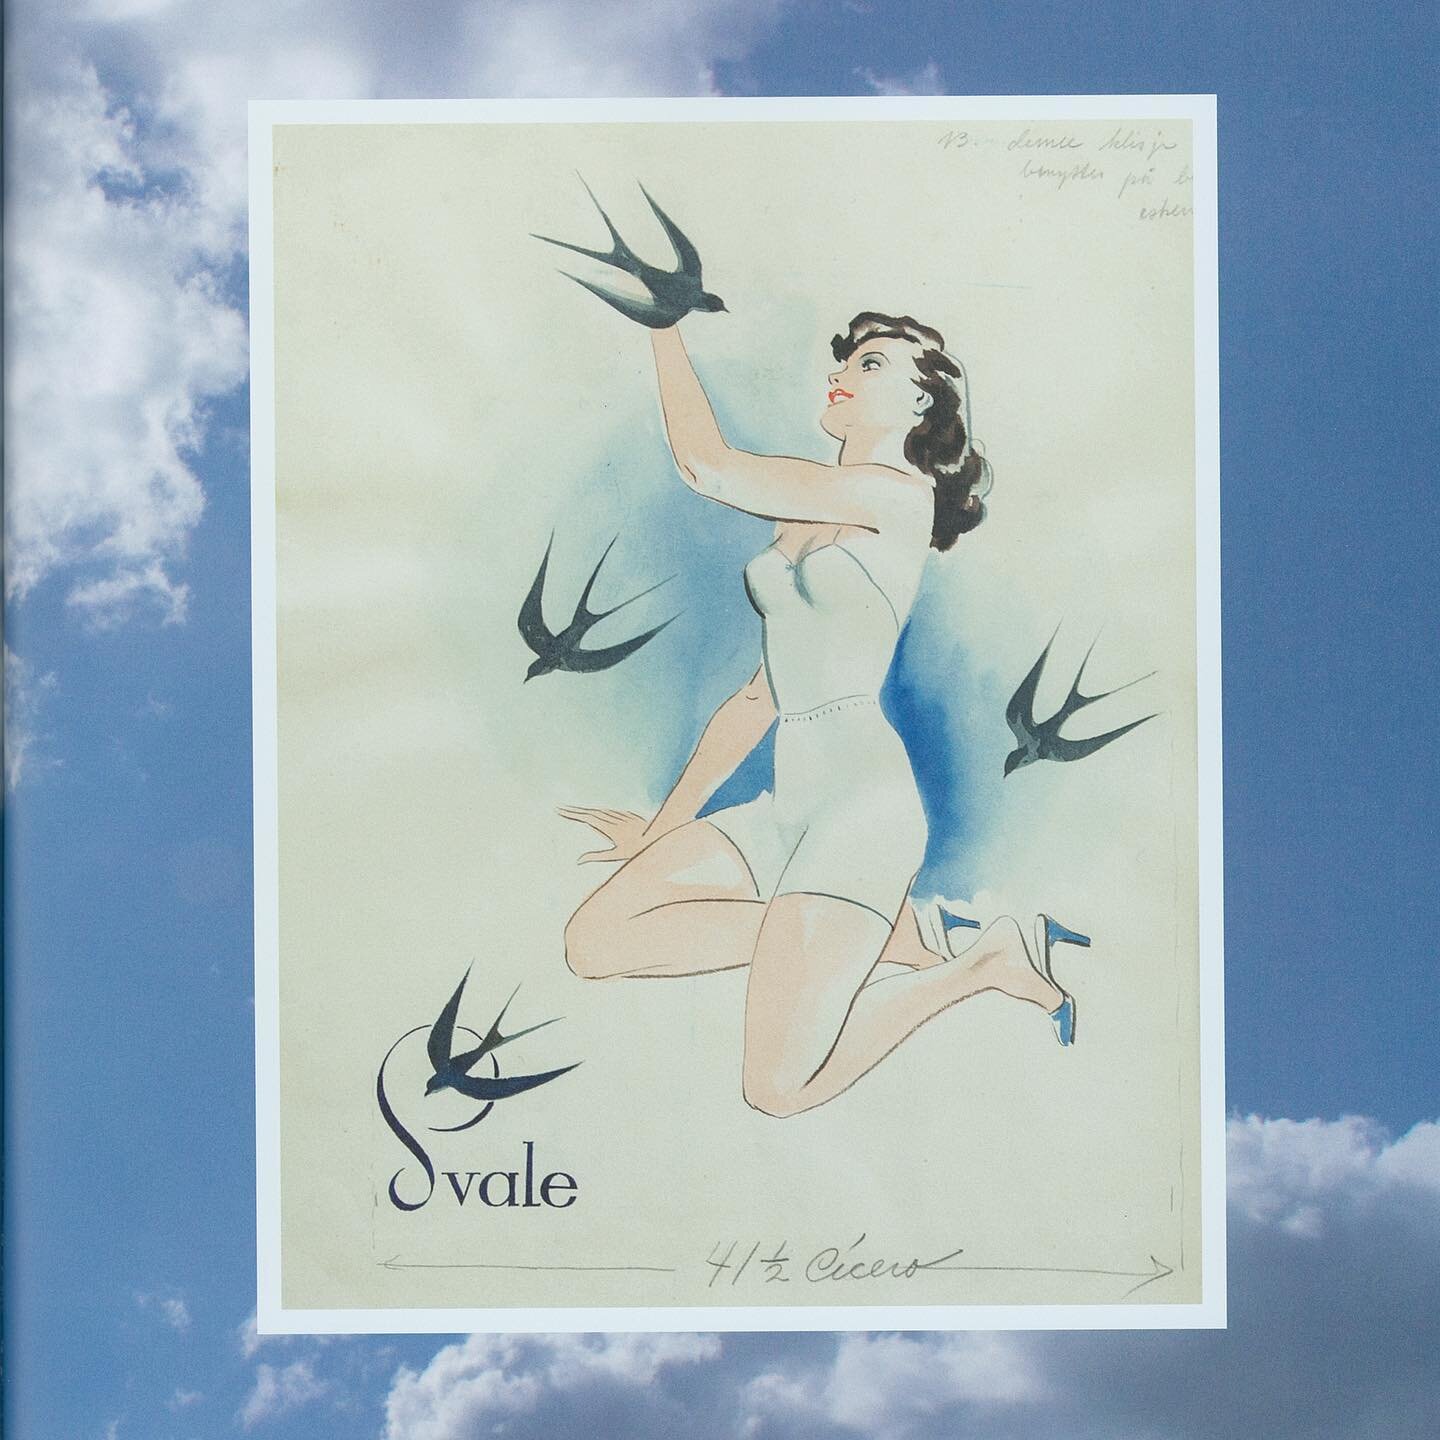 Our founder Ola Tveiten first started producing cotton underwear under the name Svale, which is the Norwegian name for the bird Swallow. 🐦 This picture is taken of one of their gorgeous product packages from the early 1950s. Today, our factory by th